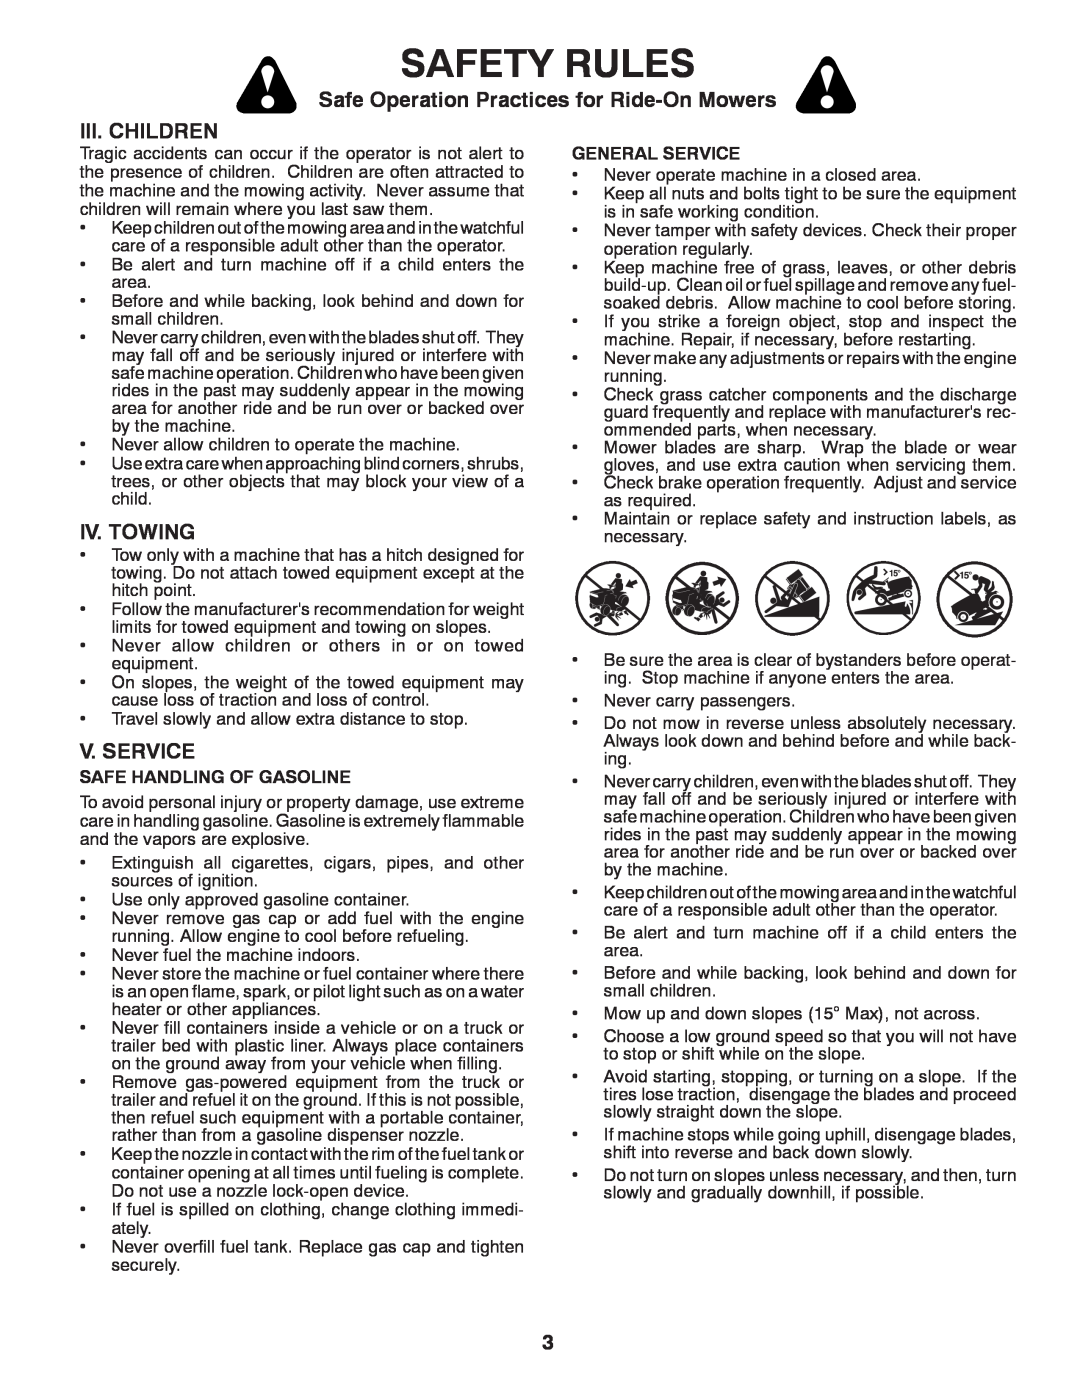 Poulan XT22H54 manual Iii. Children, Iv. Towing, V. Service, Safety Rules, Safe Operation Practices for Ride-On Mowers 